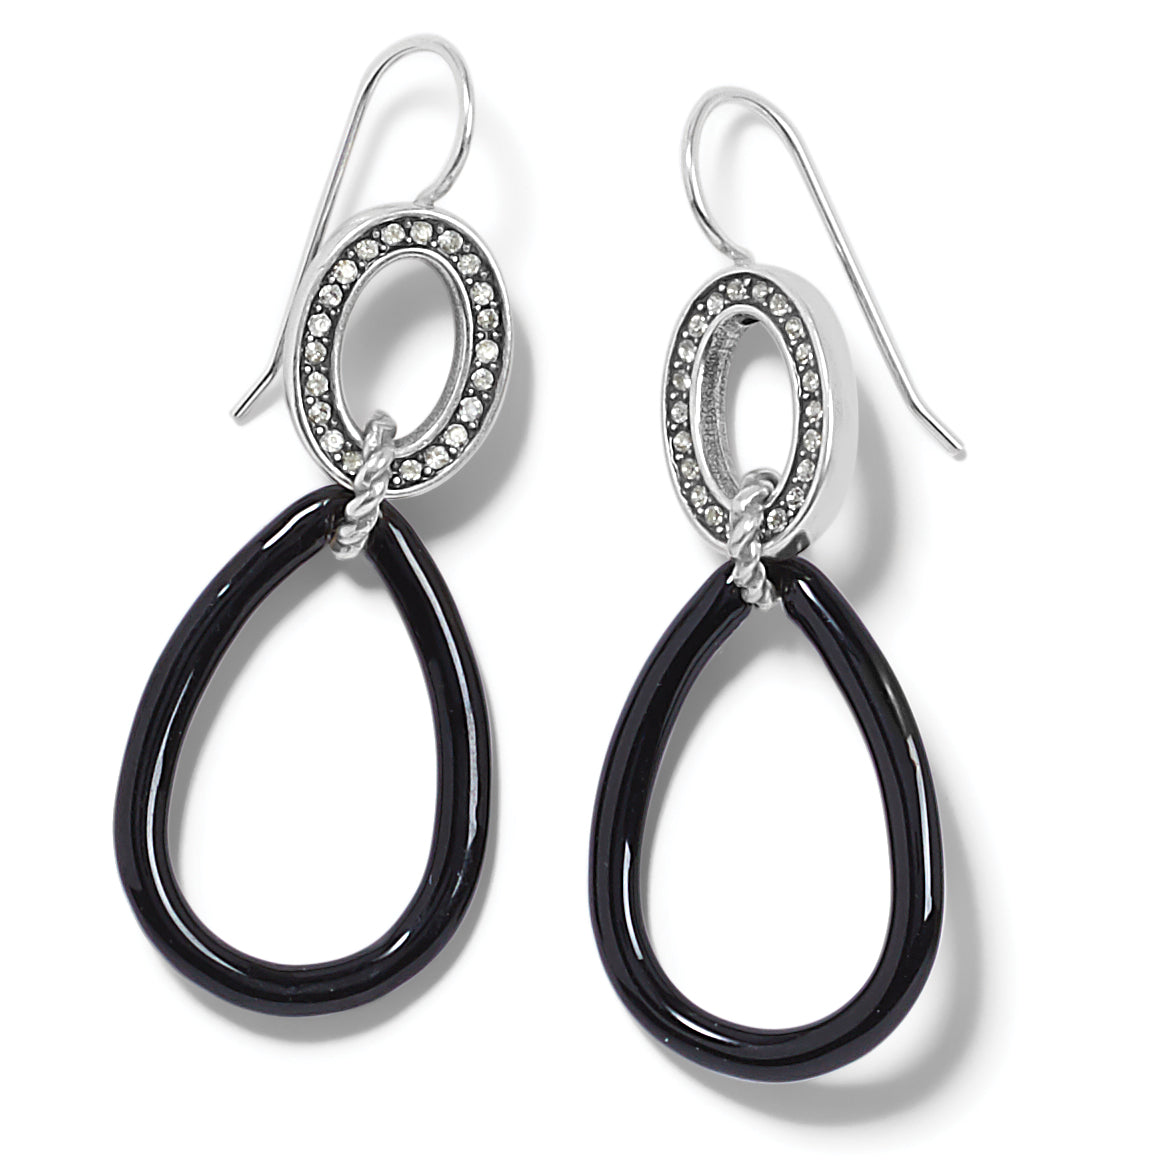 Brighton Neptune's Rings Night French Wire Earrings